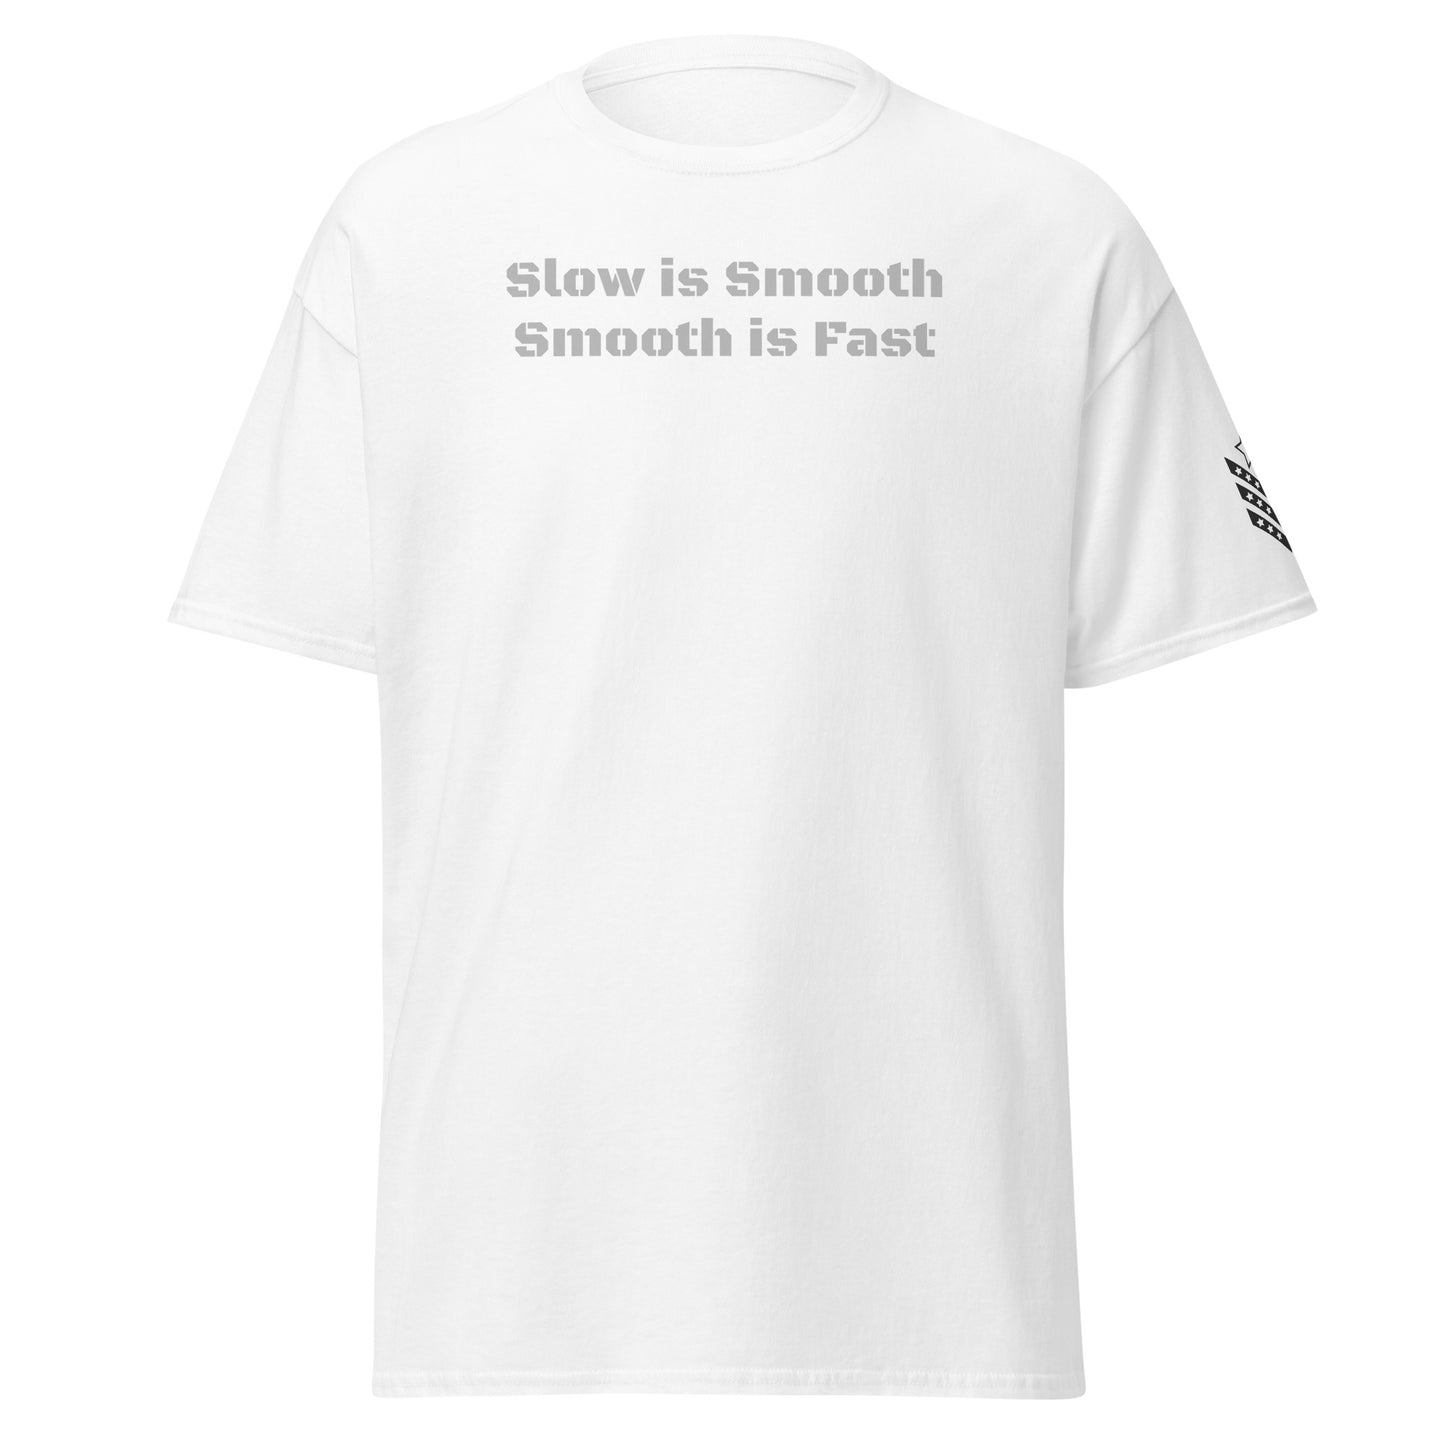 Honor Bound Gear "Smooth is Fast" Men's T-Shirt